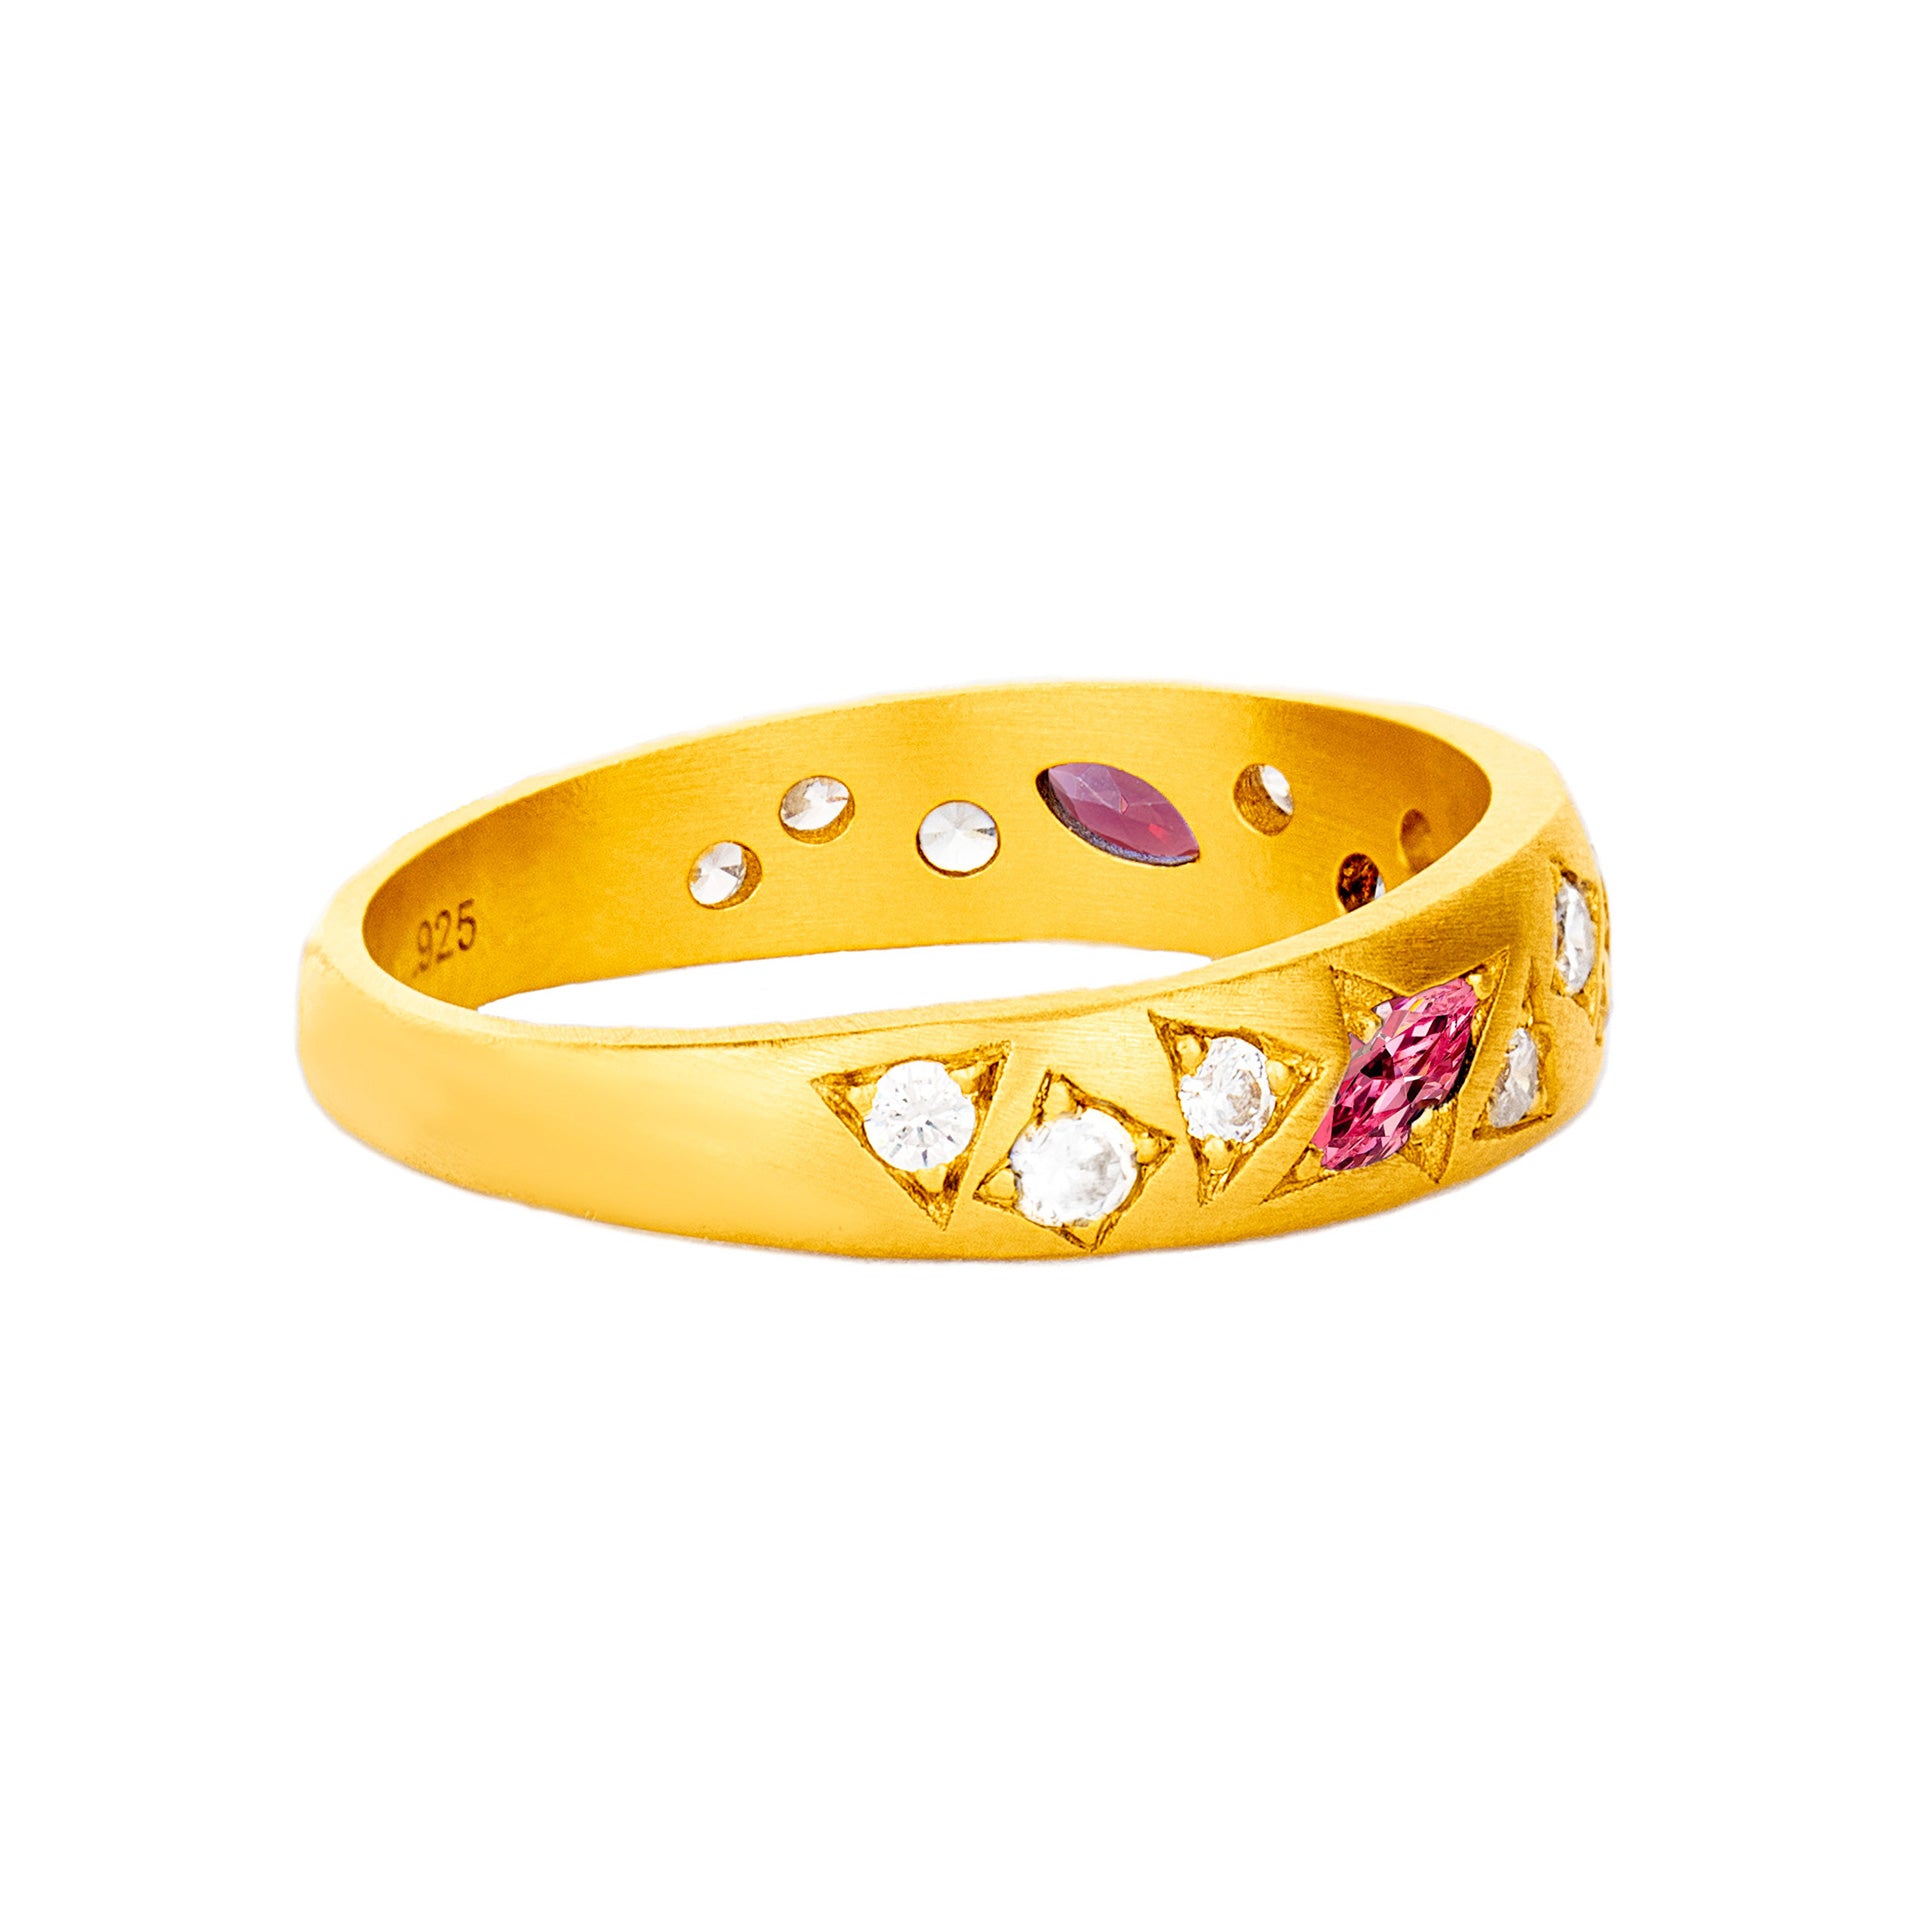 The October Birthstone Ring